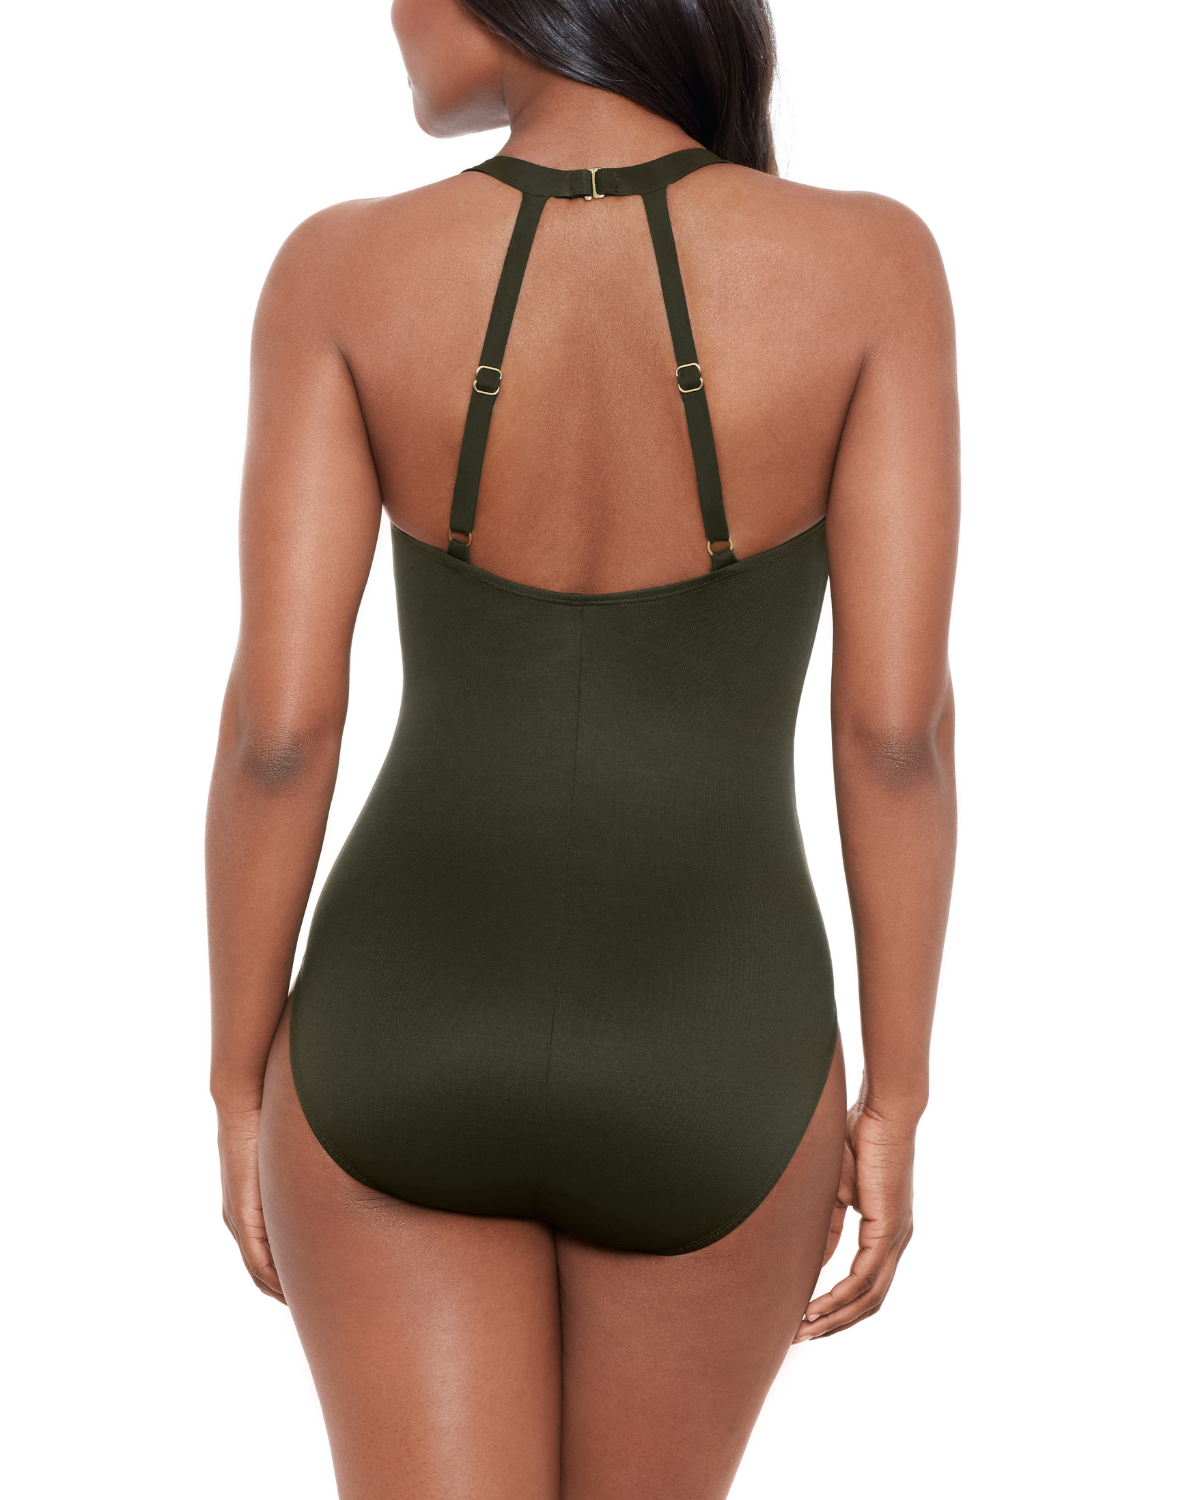 Model wearing a one piece swimsuit with a v neck and twist detail in green